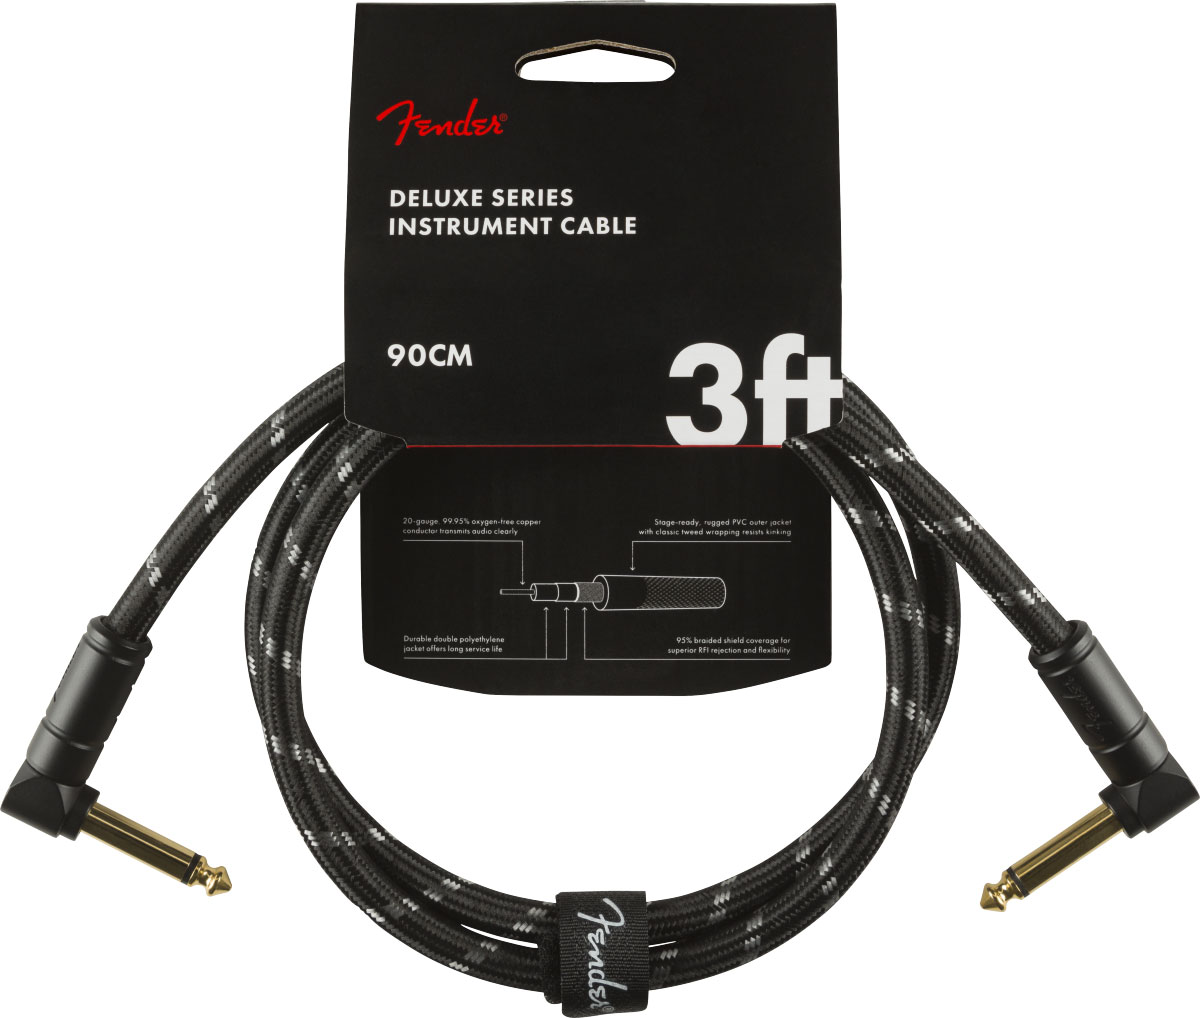 FENDER DELUXE INSTRUMENT CABLE, ANGLE/ANGLE, 3', BLACK TWEED